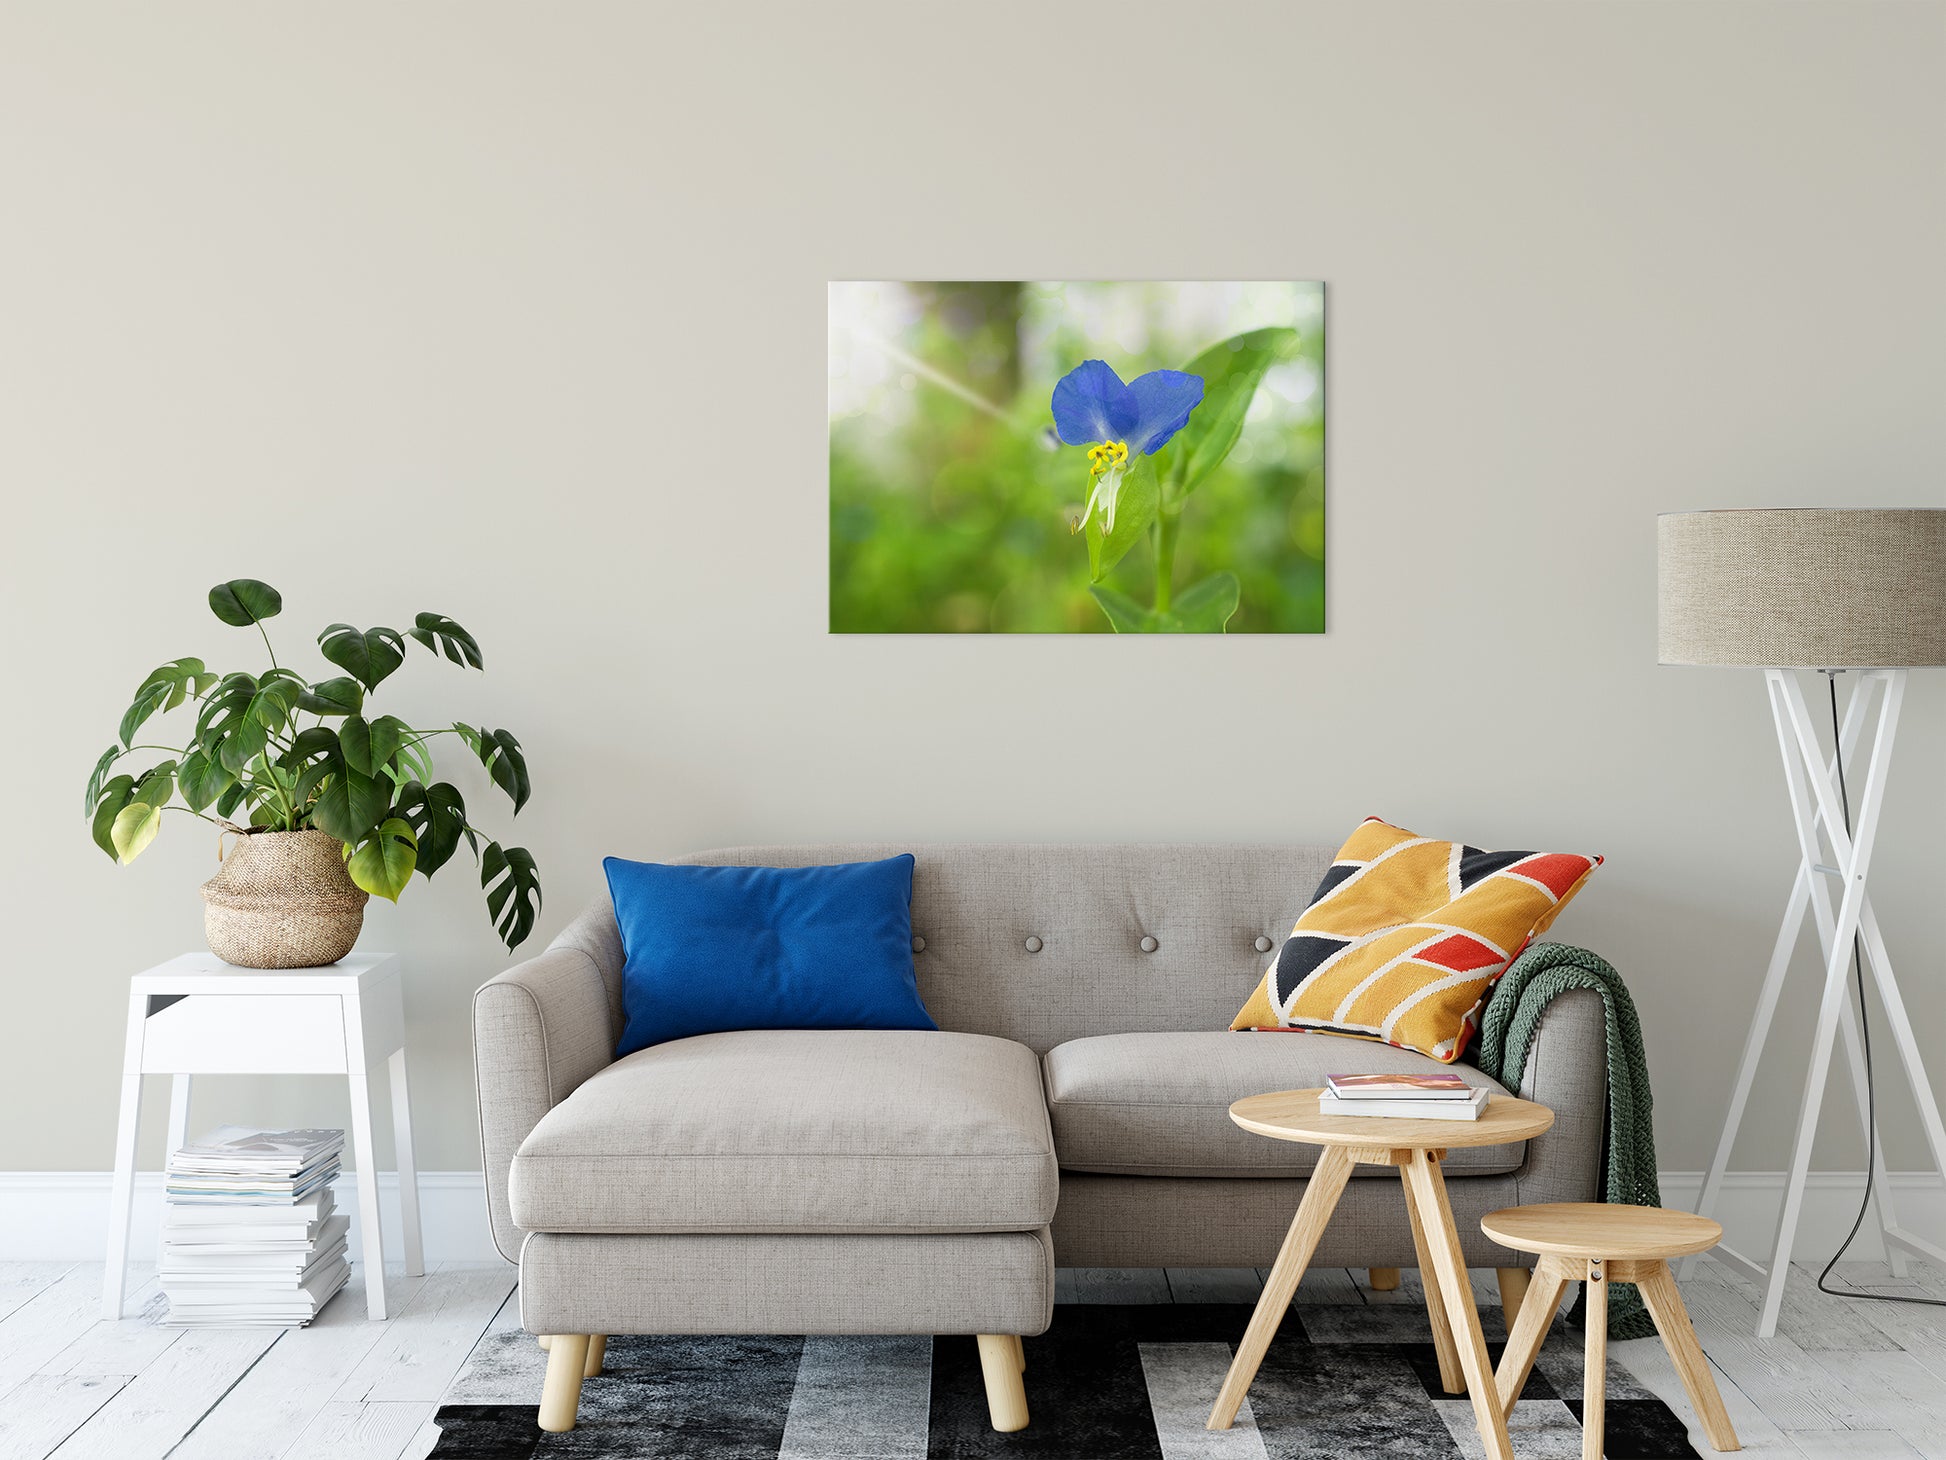 Large Canvas Flower Wall Art: Asiatic Day Flower Nature / Floral Photo Fine Art Canvas Wall Art Prints 24" x 36" - PIPAFINEART